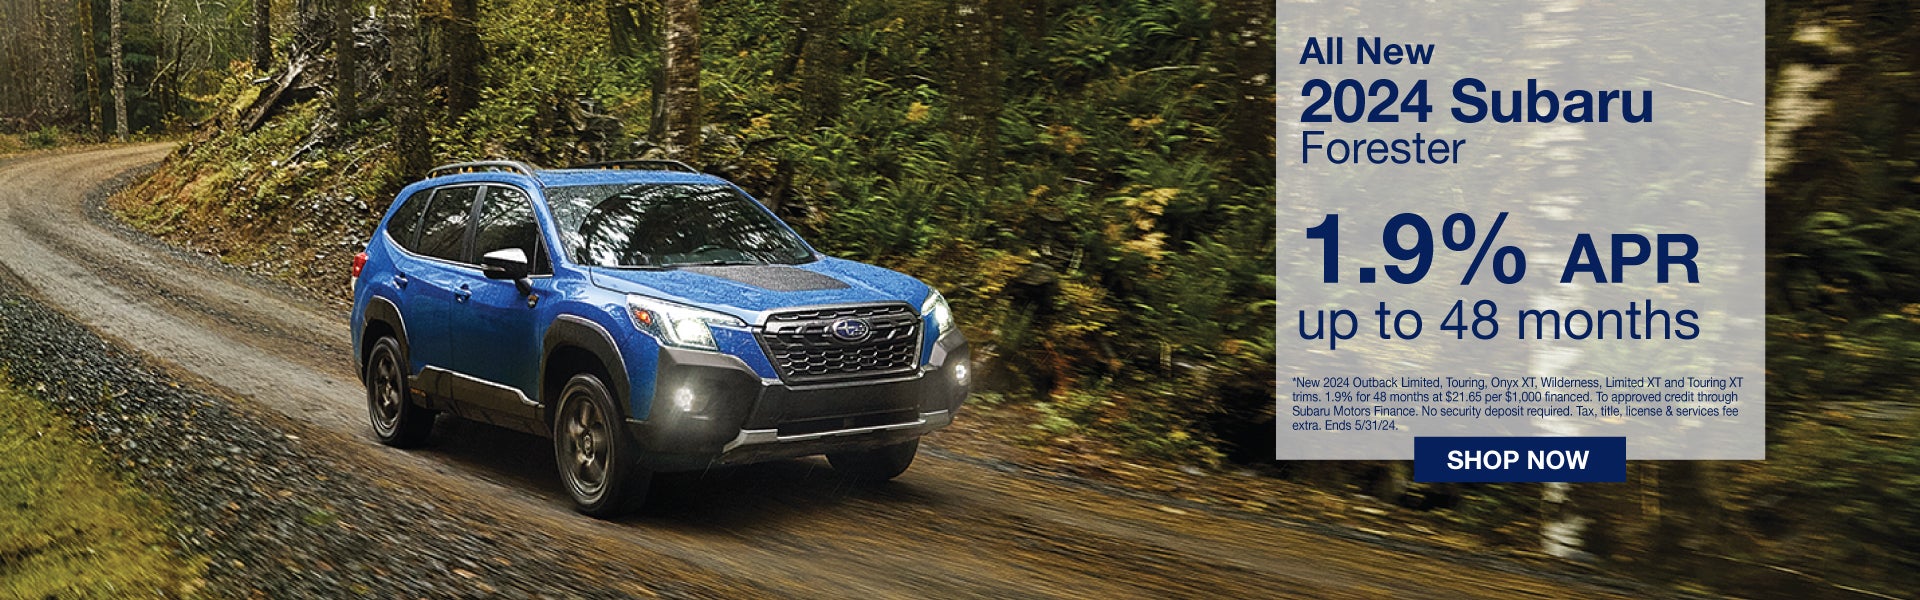 2024 Subaru Forester. 1.9% ARP up to 48 months.